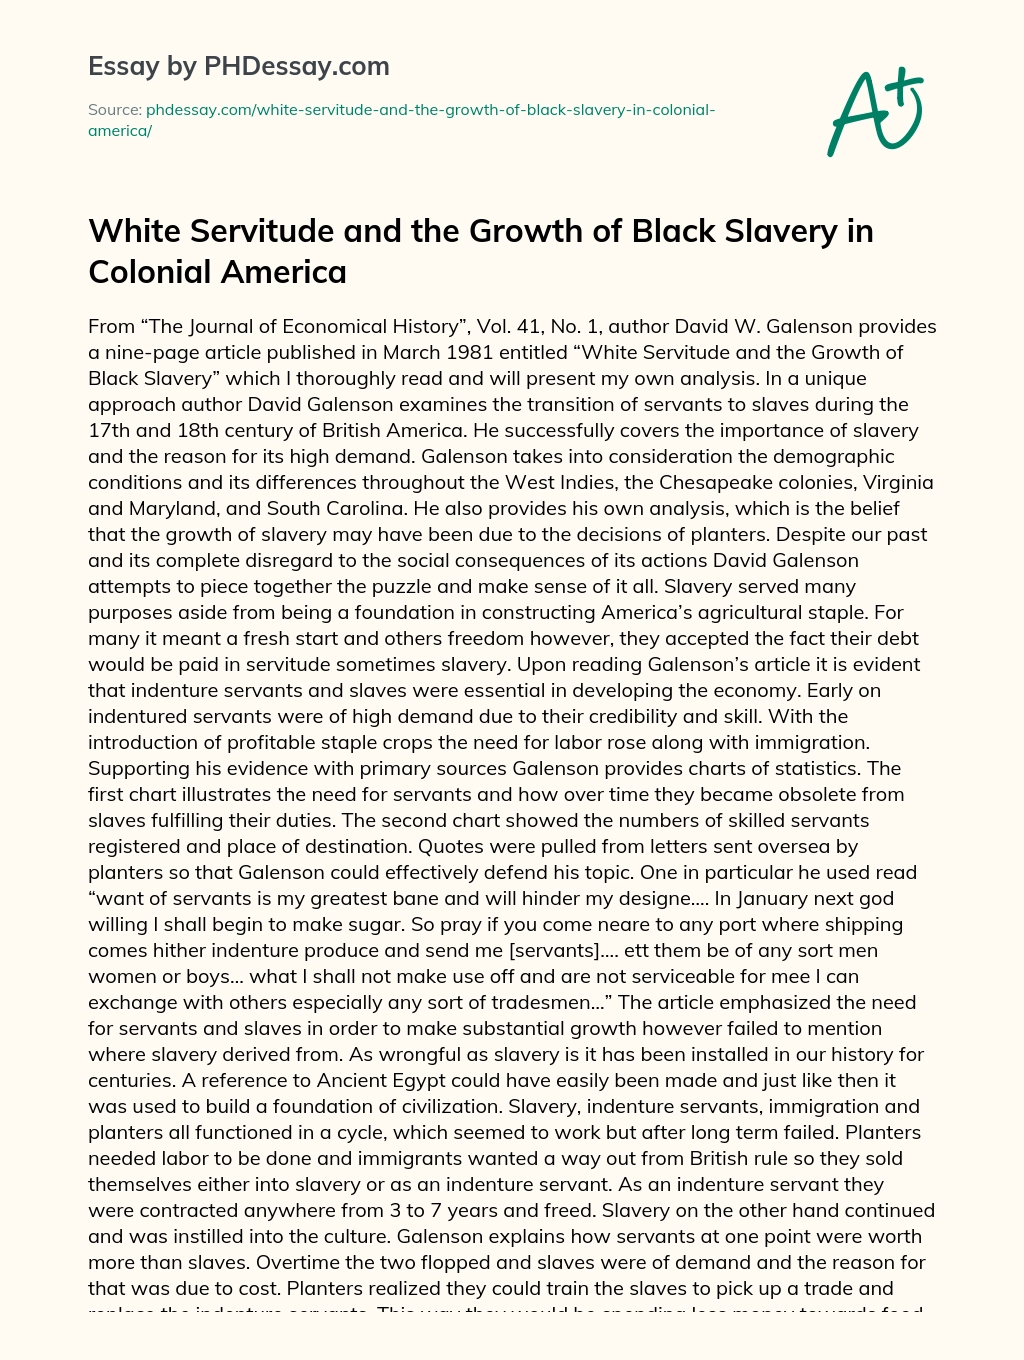 White Servitude and the Growth of Black Slavery in Colonial America essay